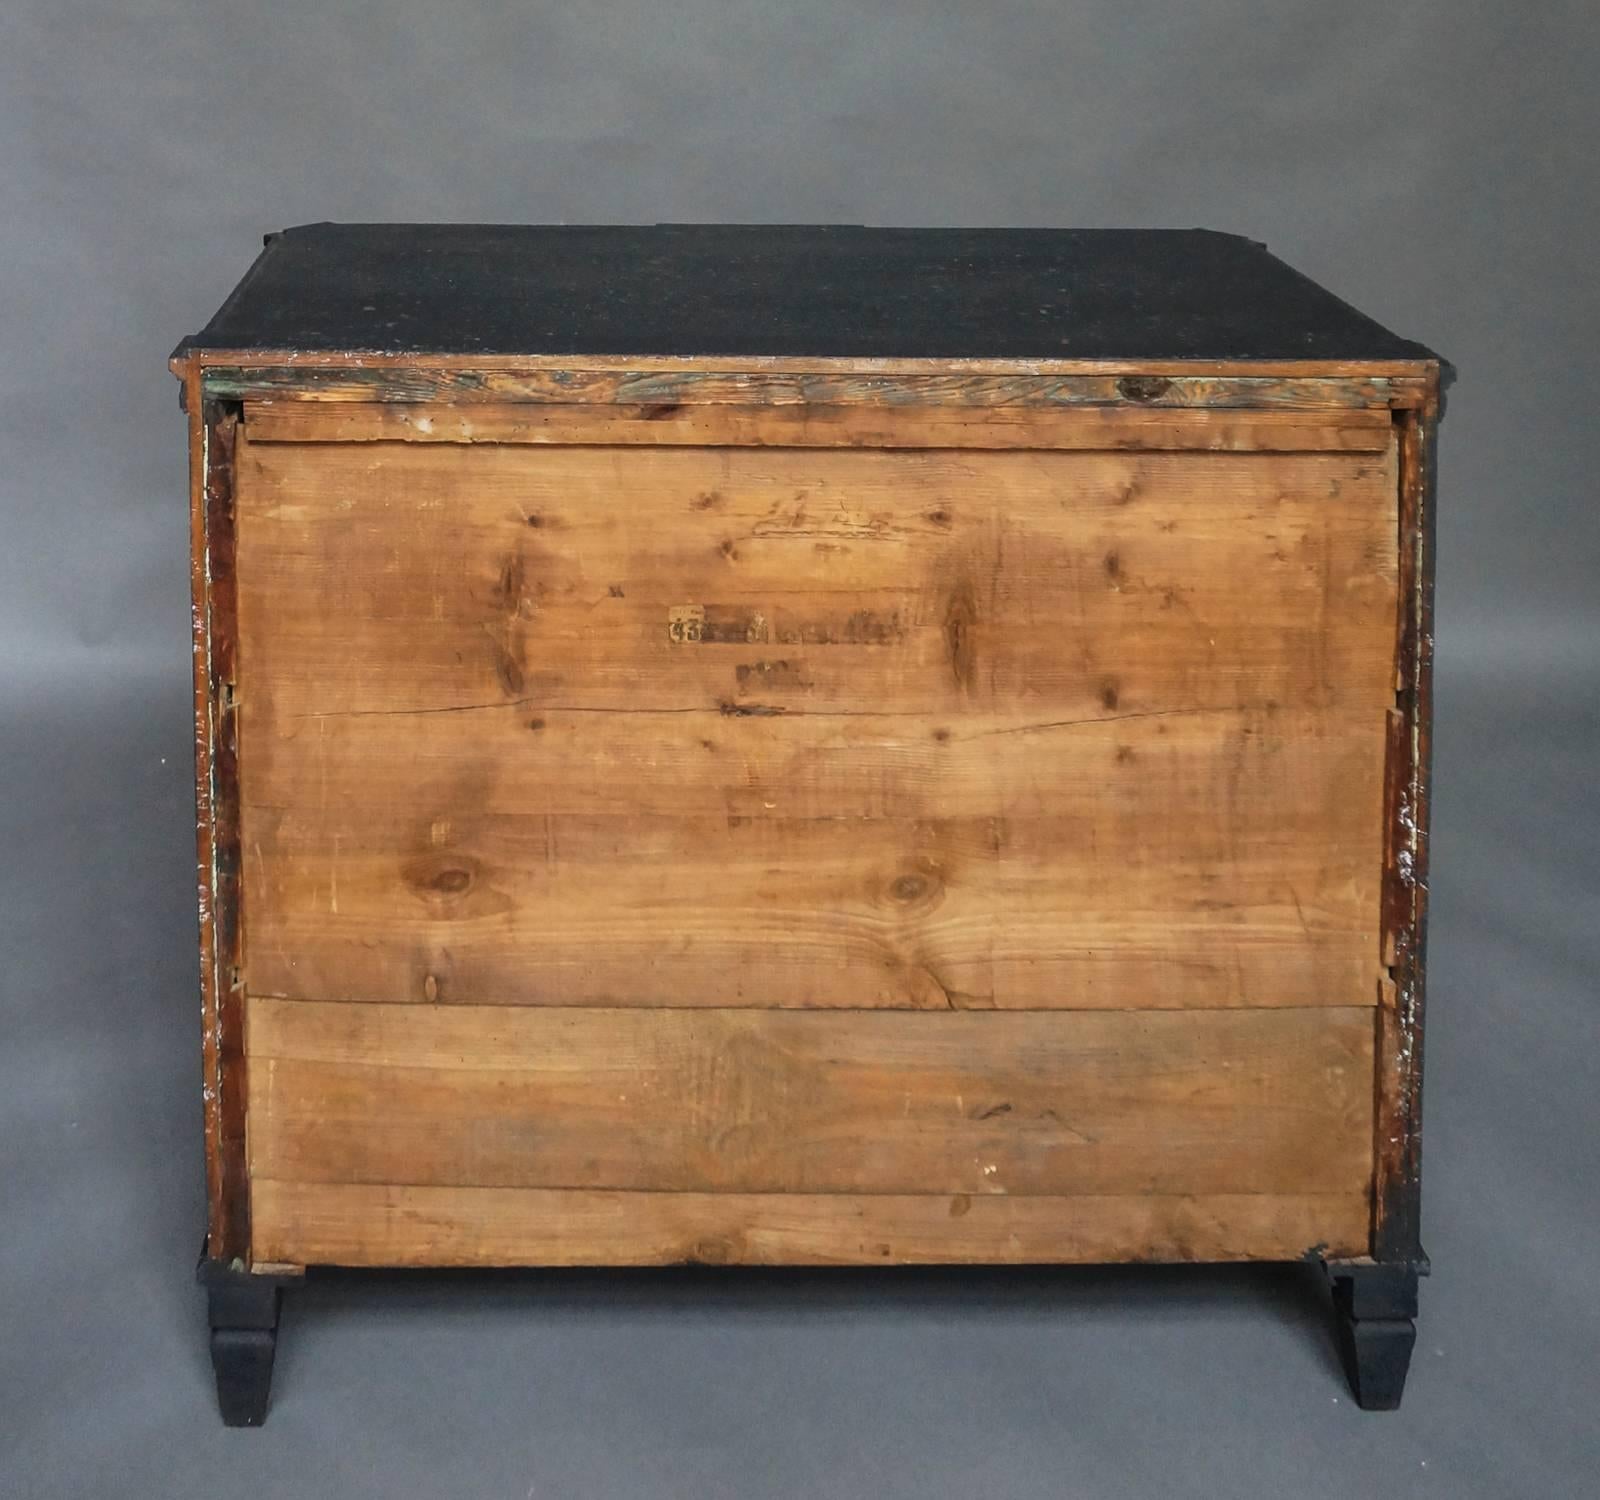 19th Century Gustavian Style Chest of Drawers in Black